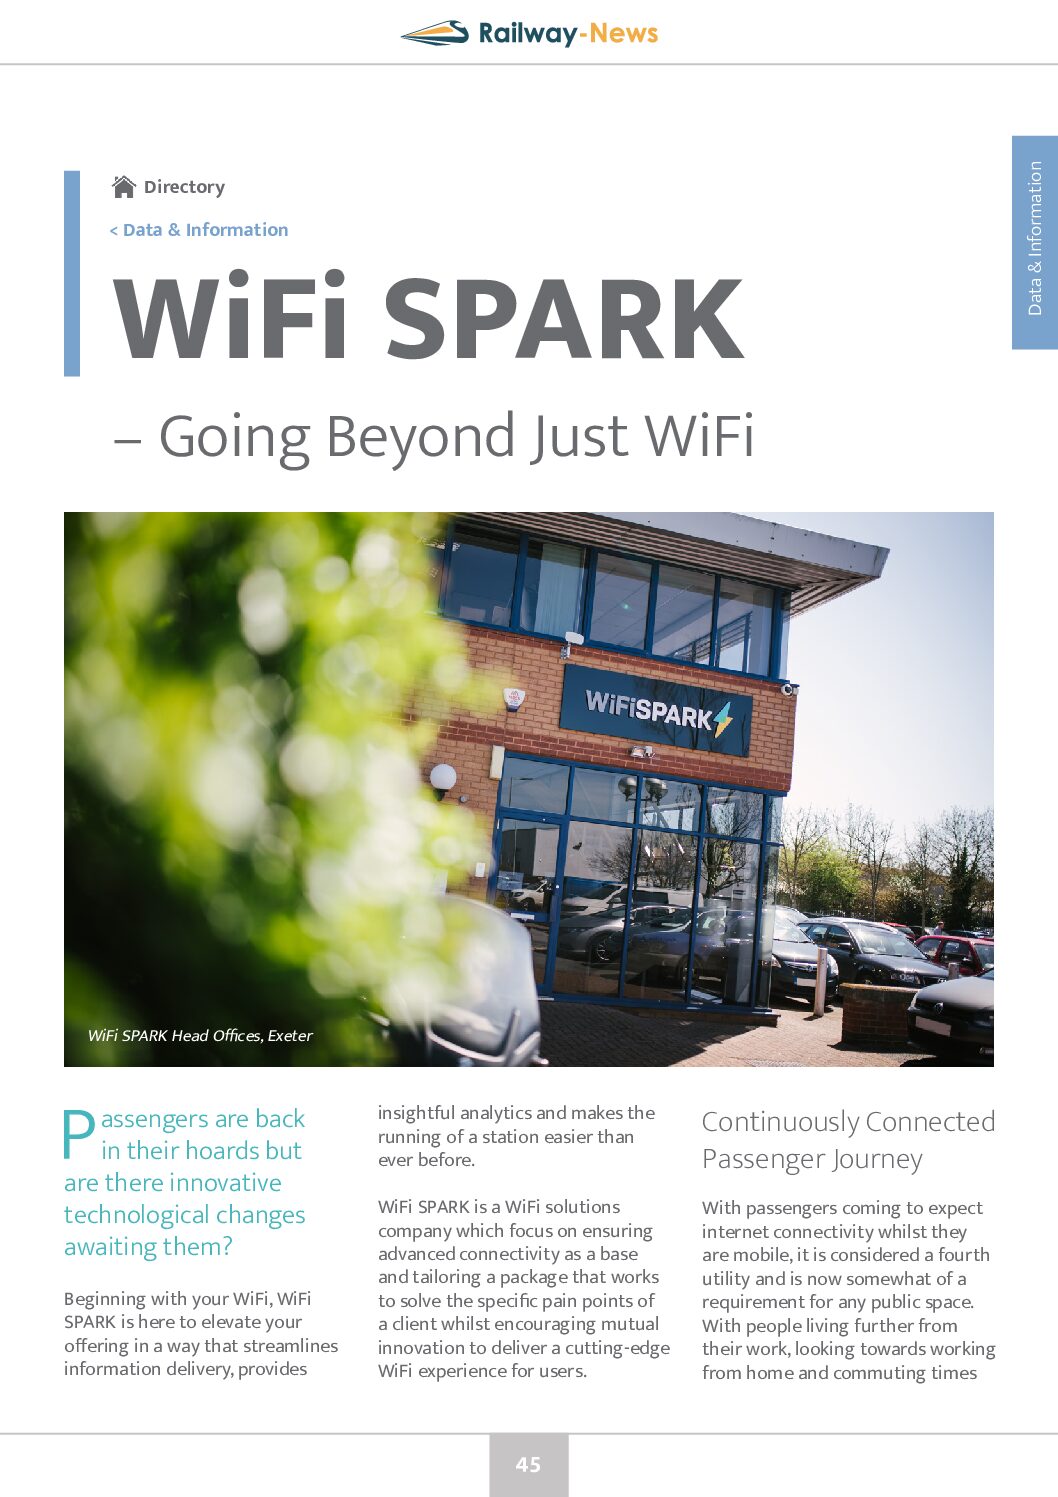 WiFi SPARK – Going Beyond Just WiFi